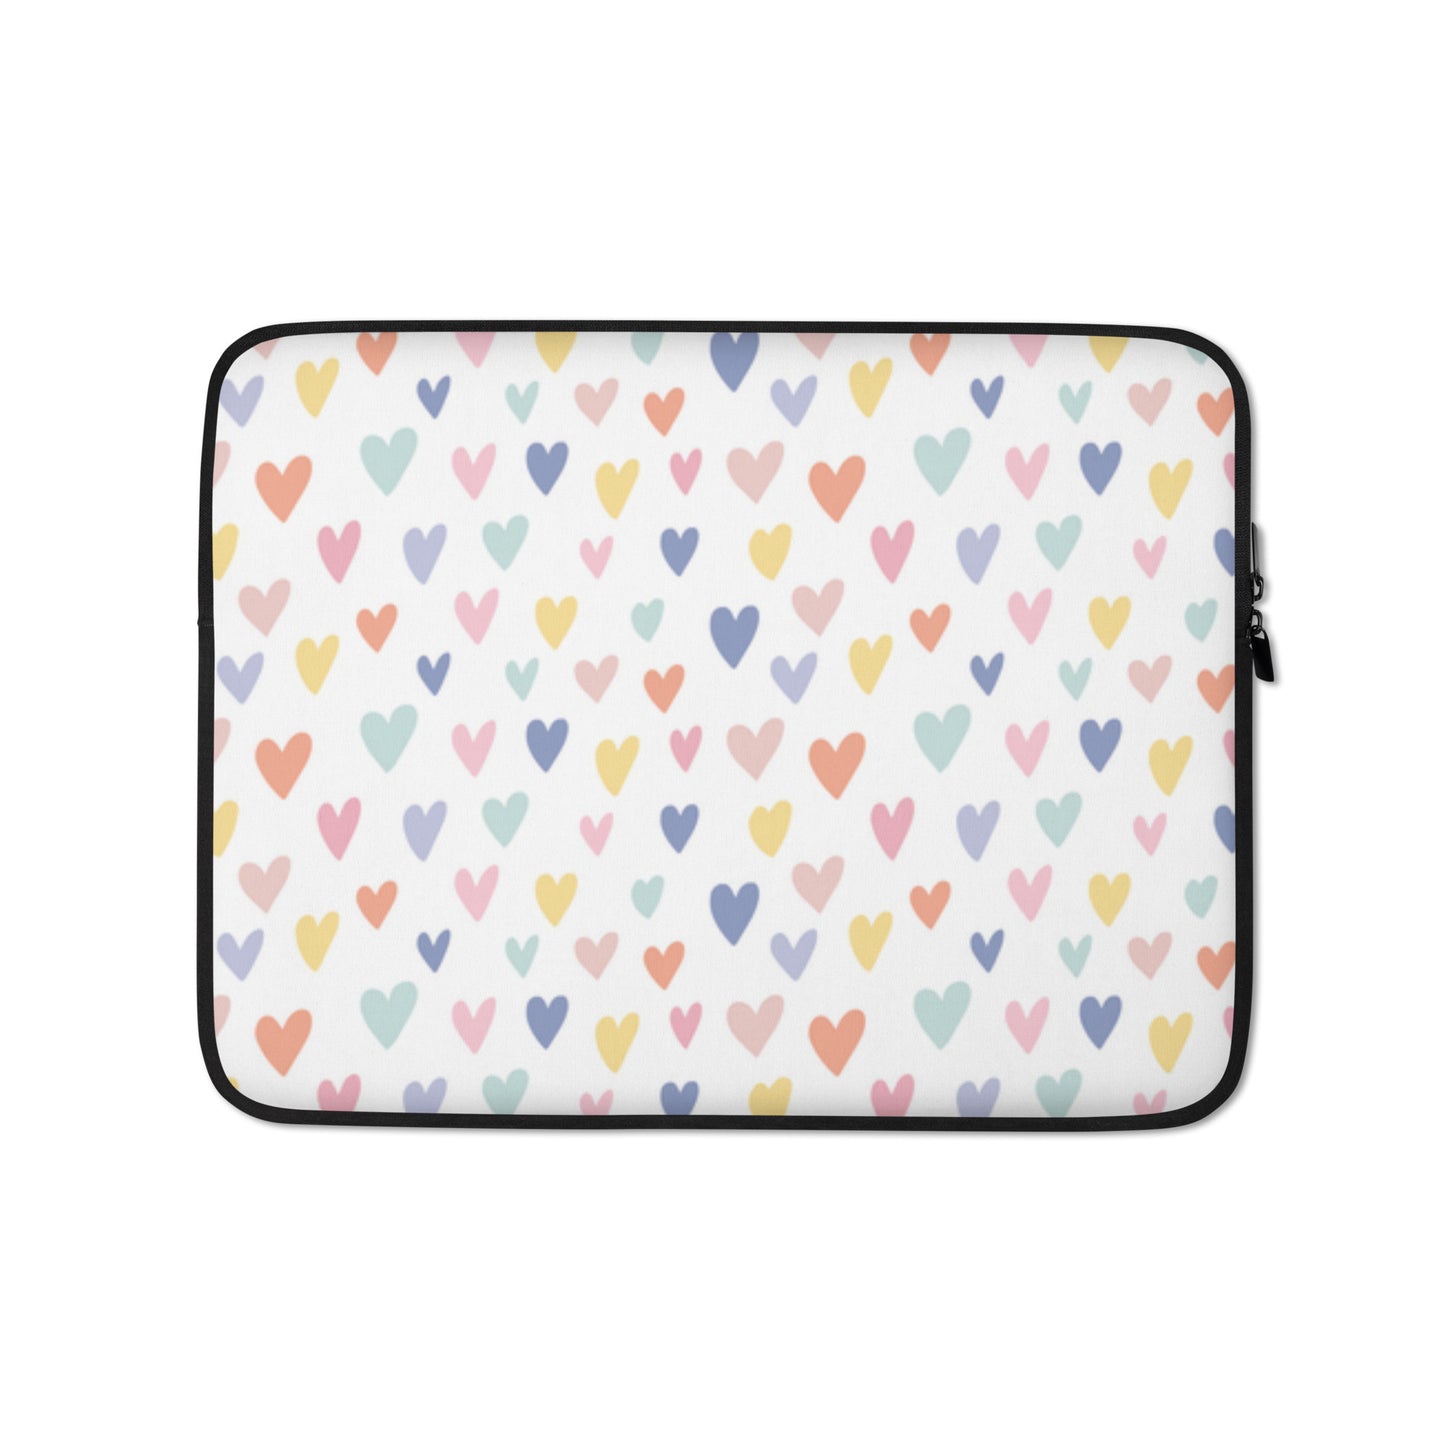 Laptop Sleeve Case - Hearts - Holiday Accent Ltd